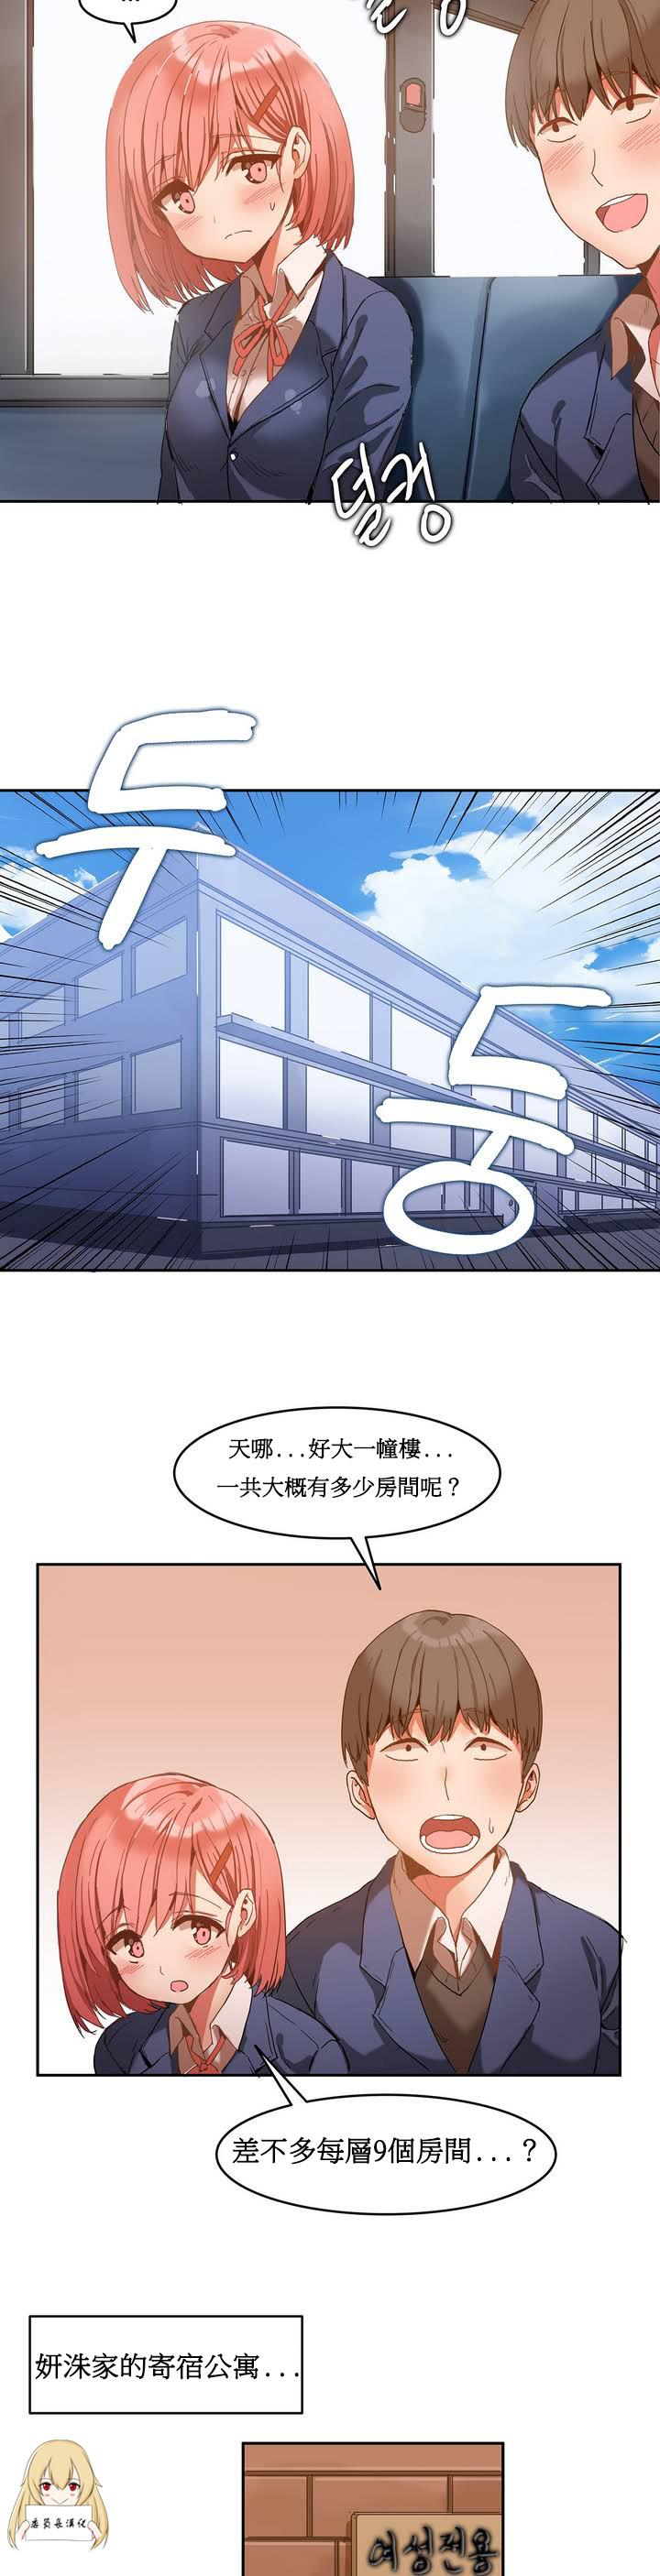 Oldyoung Hahri's Lumpy Boardhouse Ch. 1~14【委員長個人漢化】（持續更新） Alone - Page 11